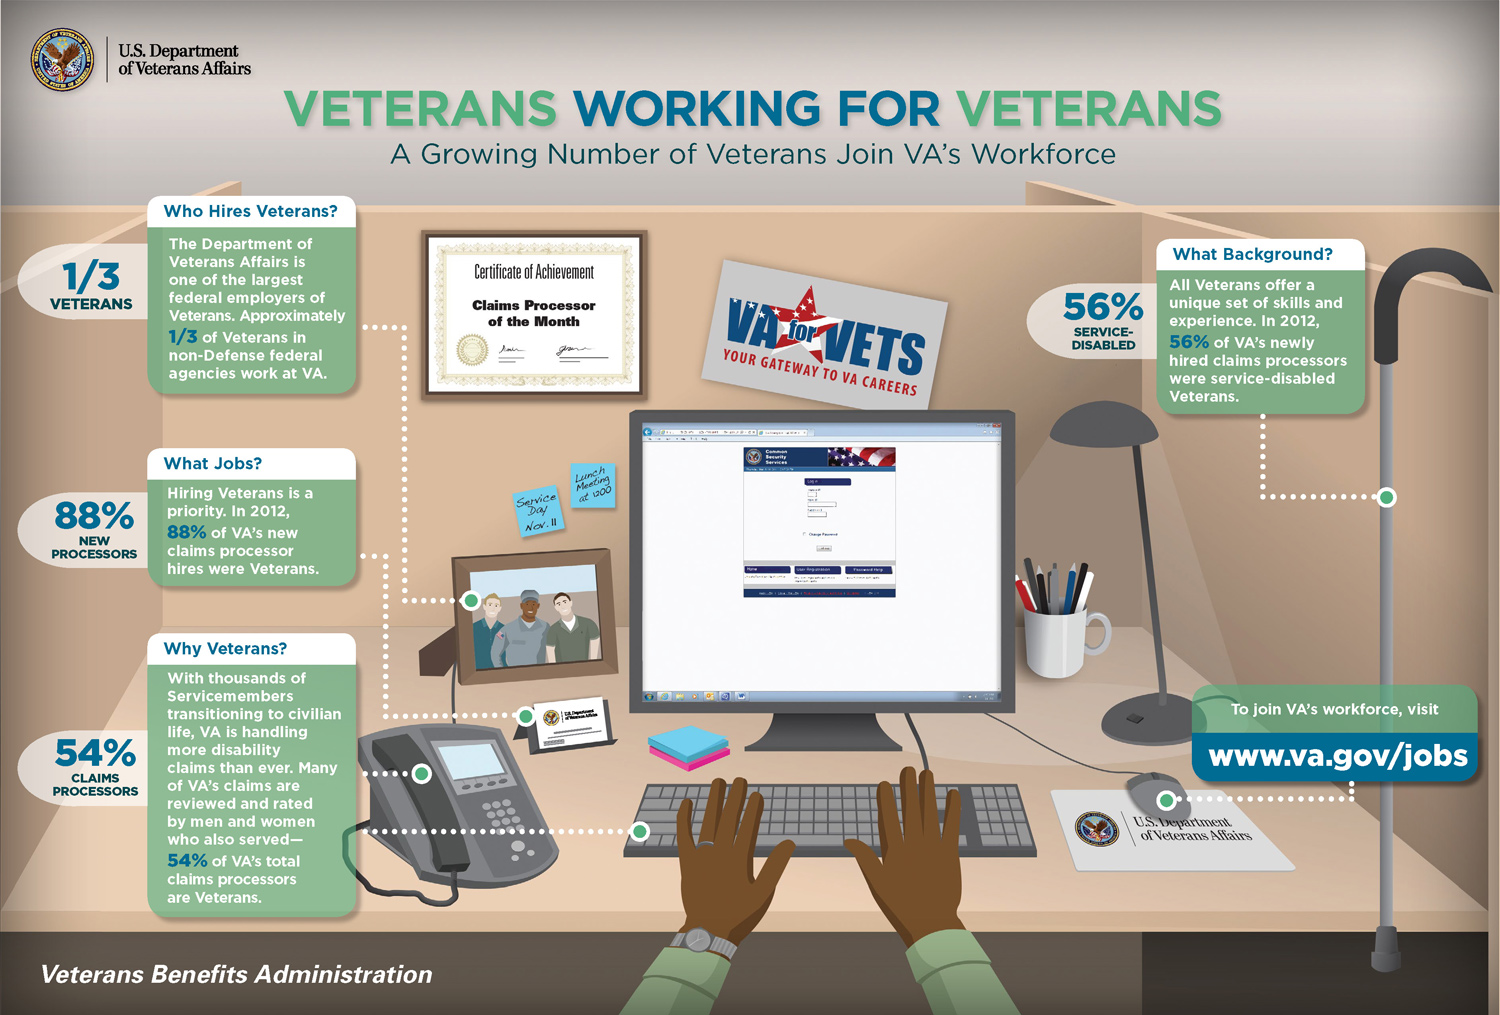 VETERANS WORKING FOR VETERANS. A growing Number of Veterans Join VA's Workforce. 1/3 of Veterans in non-Defense federal agencies work at VA. 88% of VA's new claims processor hires were Veterans. 54% of VA's total claims processors are Veterans. Please see PDF Download link to view an accessible PDF that addresses the full text content of this document.